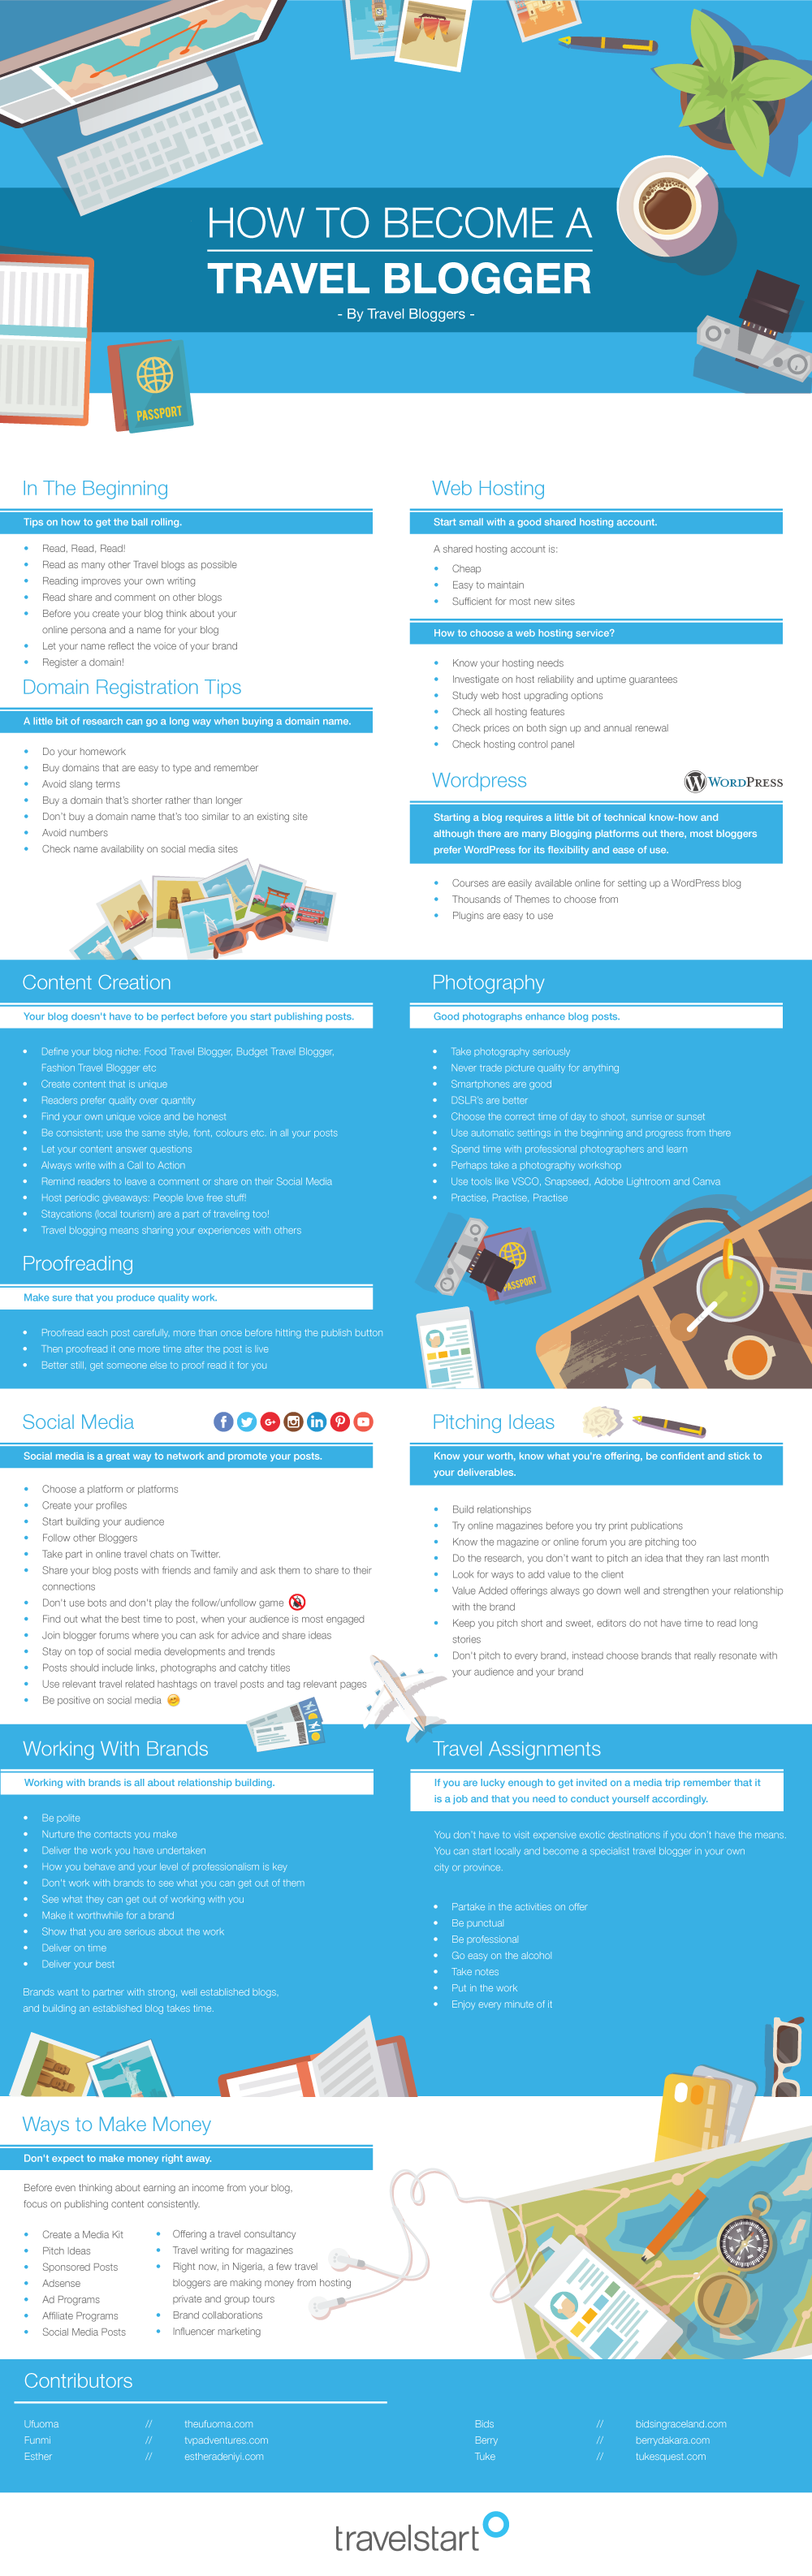 Travel Blogger Infographic-how to be a travel blogger